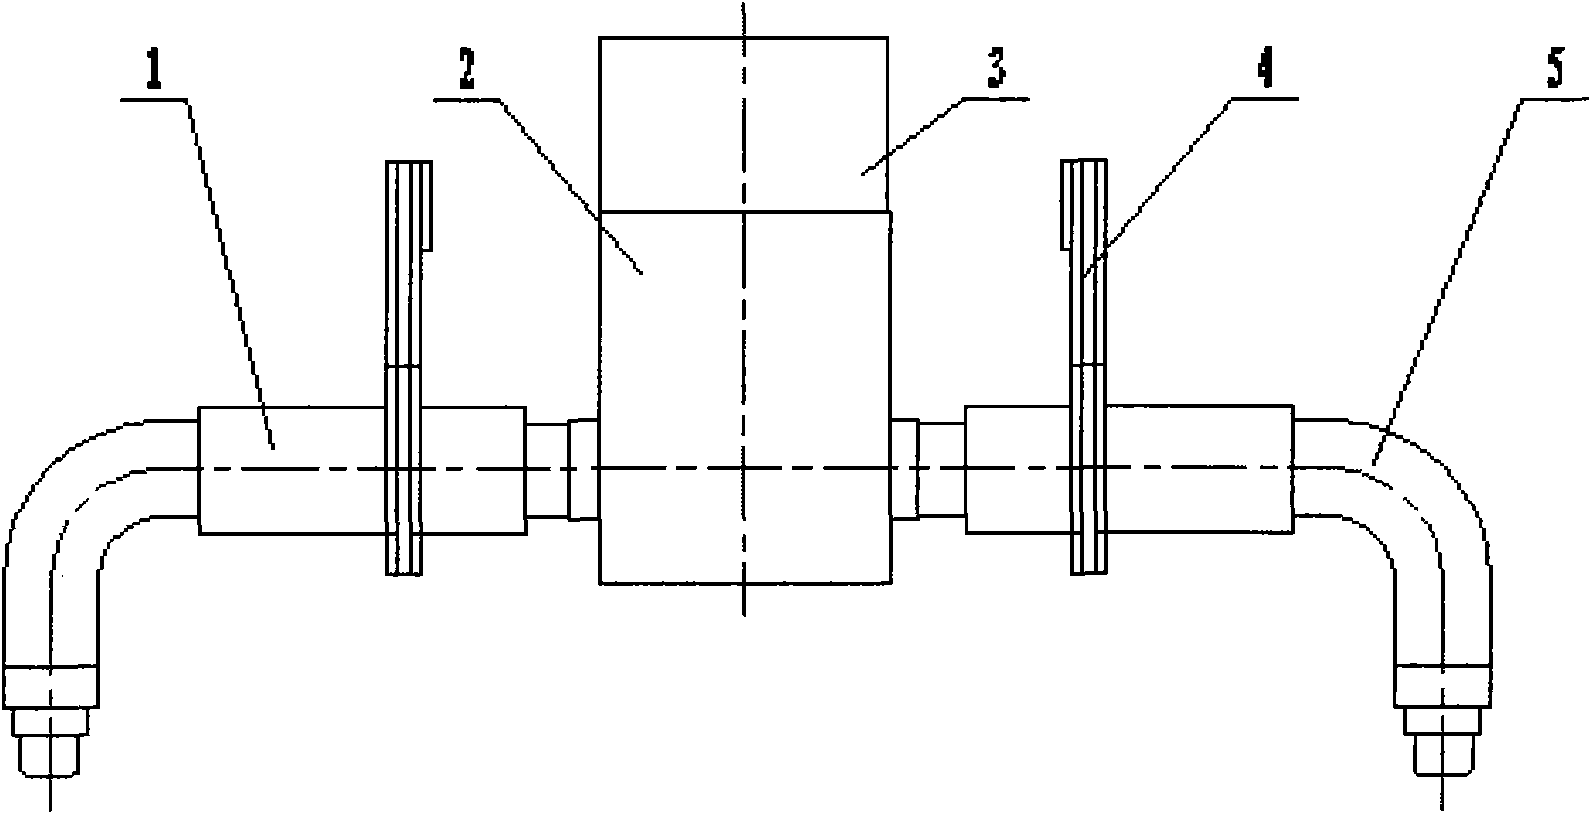 High-voltage terminal device for transformer